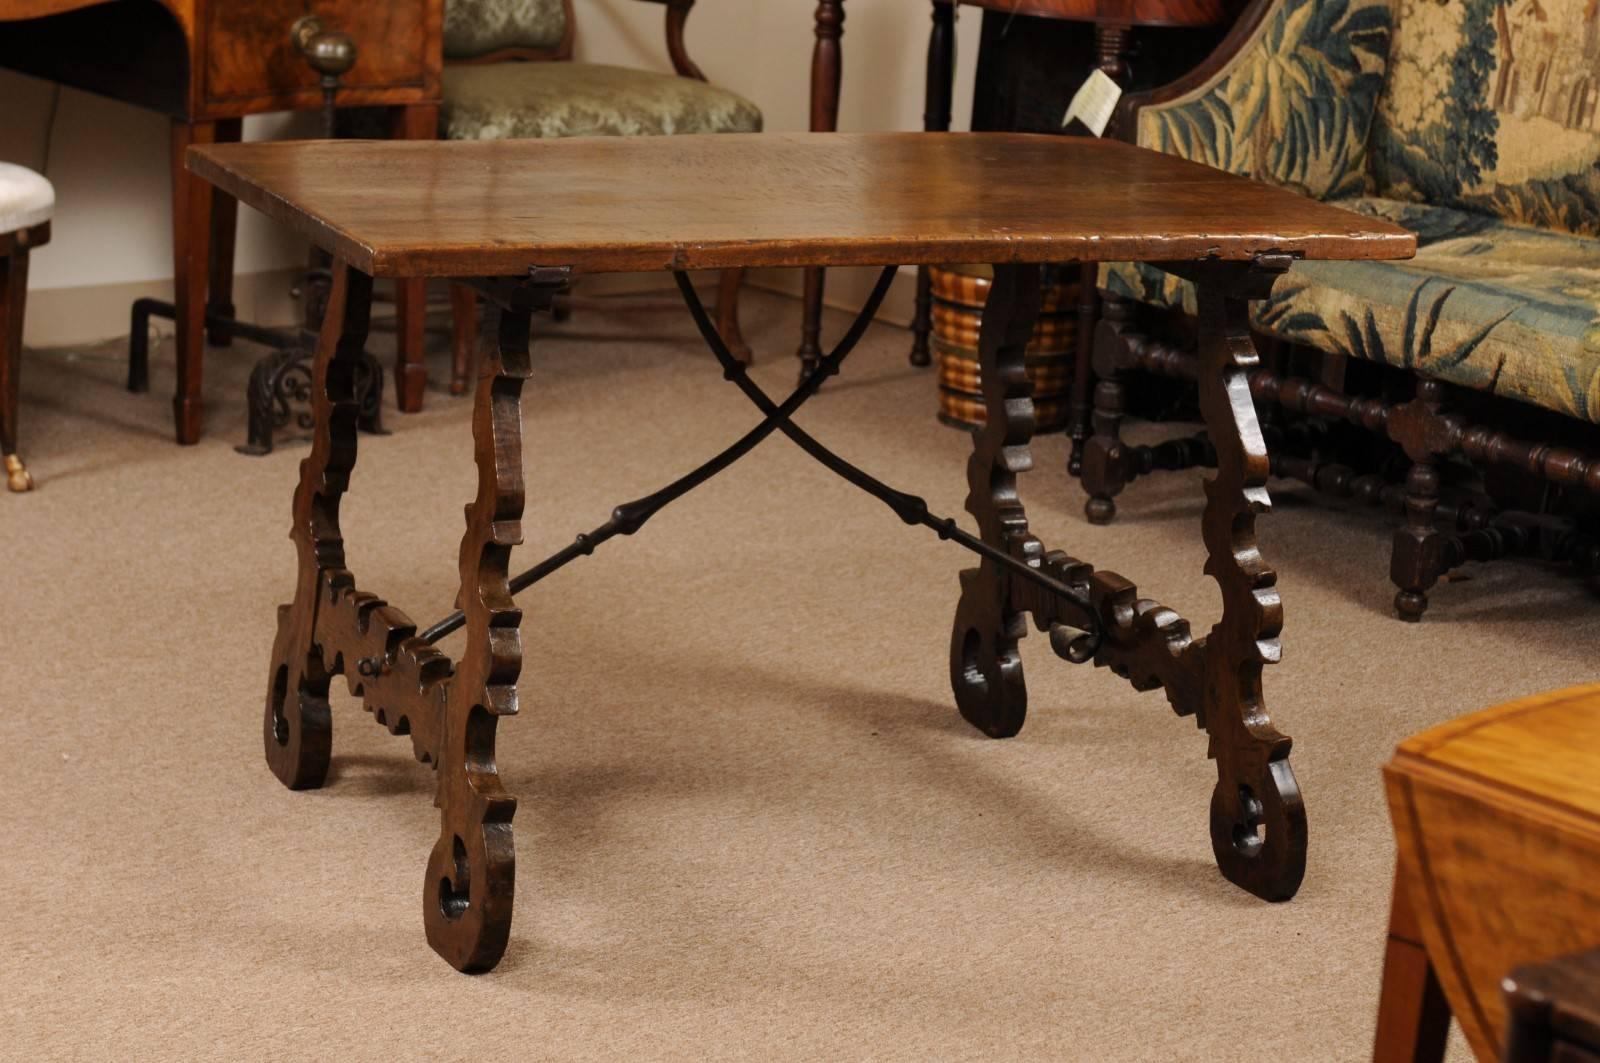 The 18th century Spanish table in walnut with carved pierced lyre shaped legs and wrought iron stretcher.